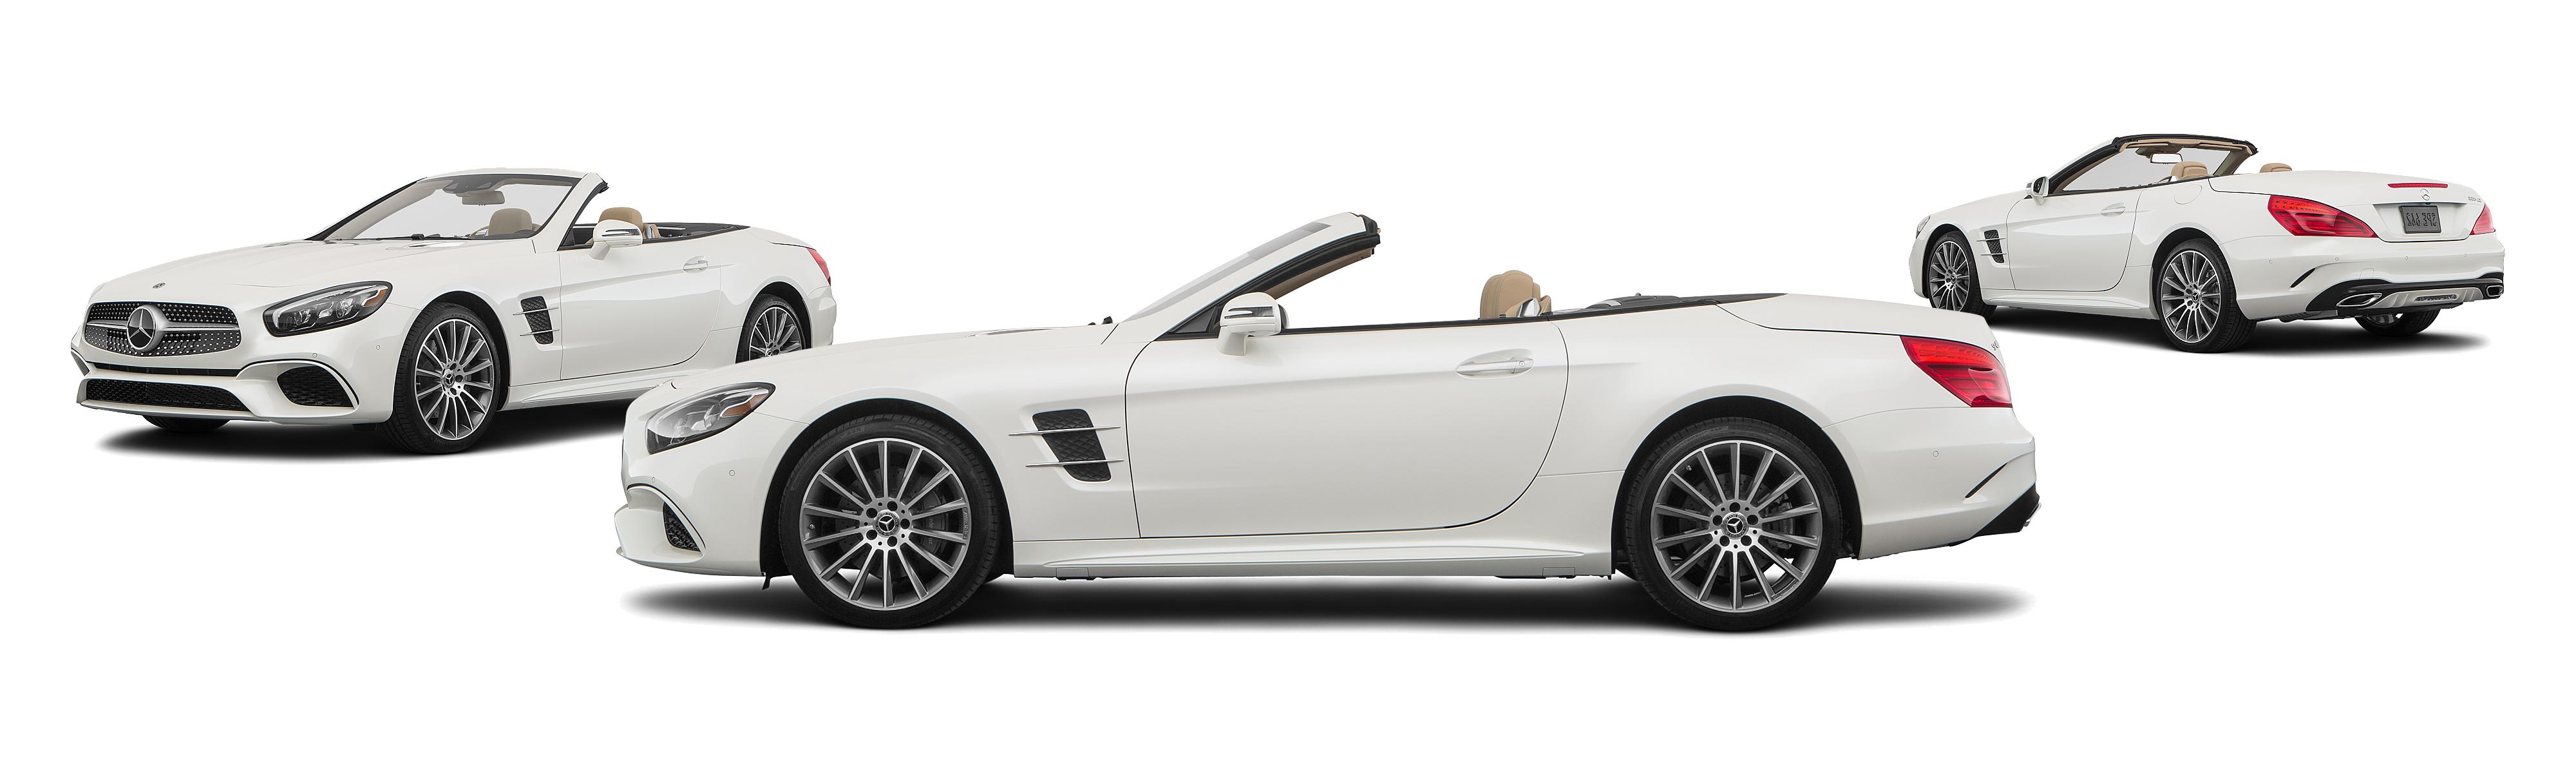 2020 Mercedes-Benz SL-Class SL 450 2dr Roadster - Research - GrooveCar